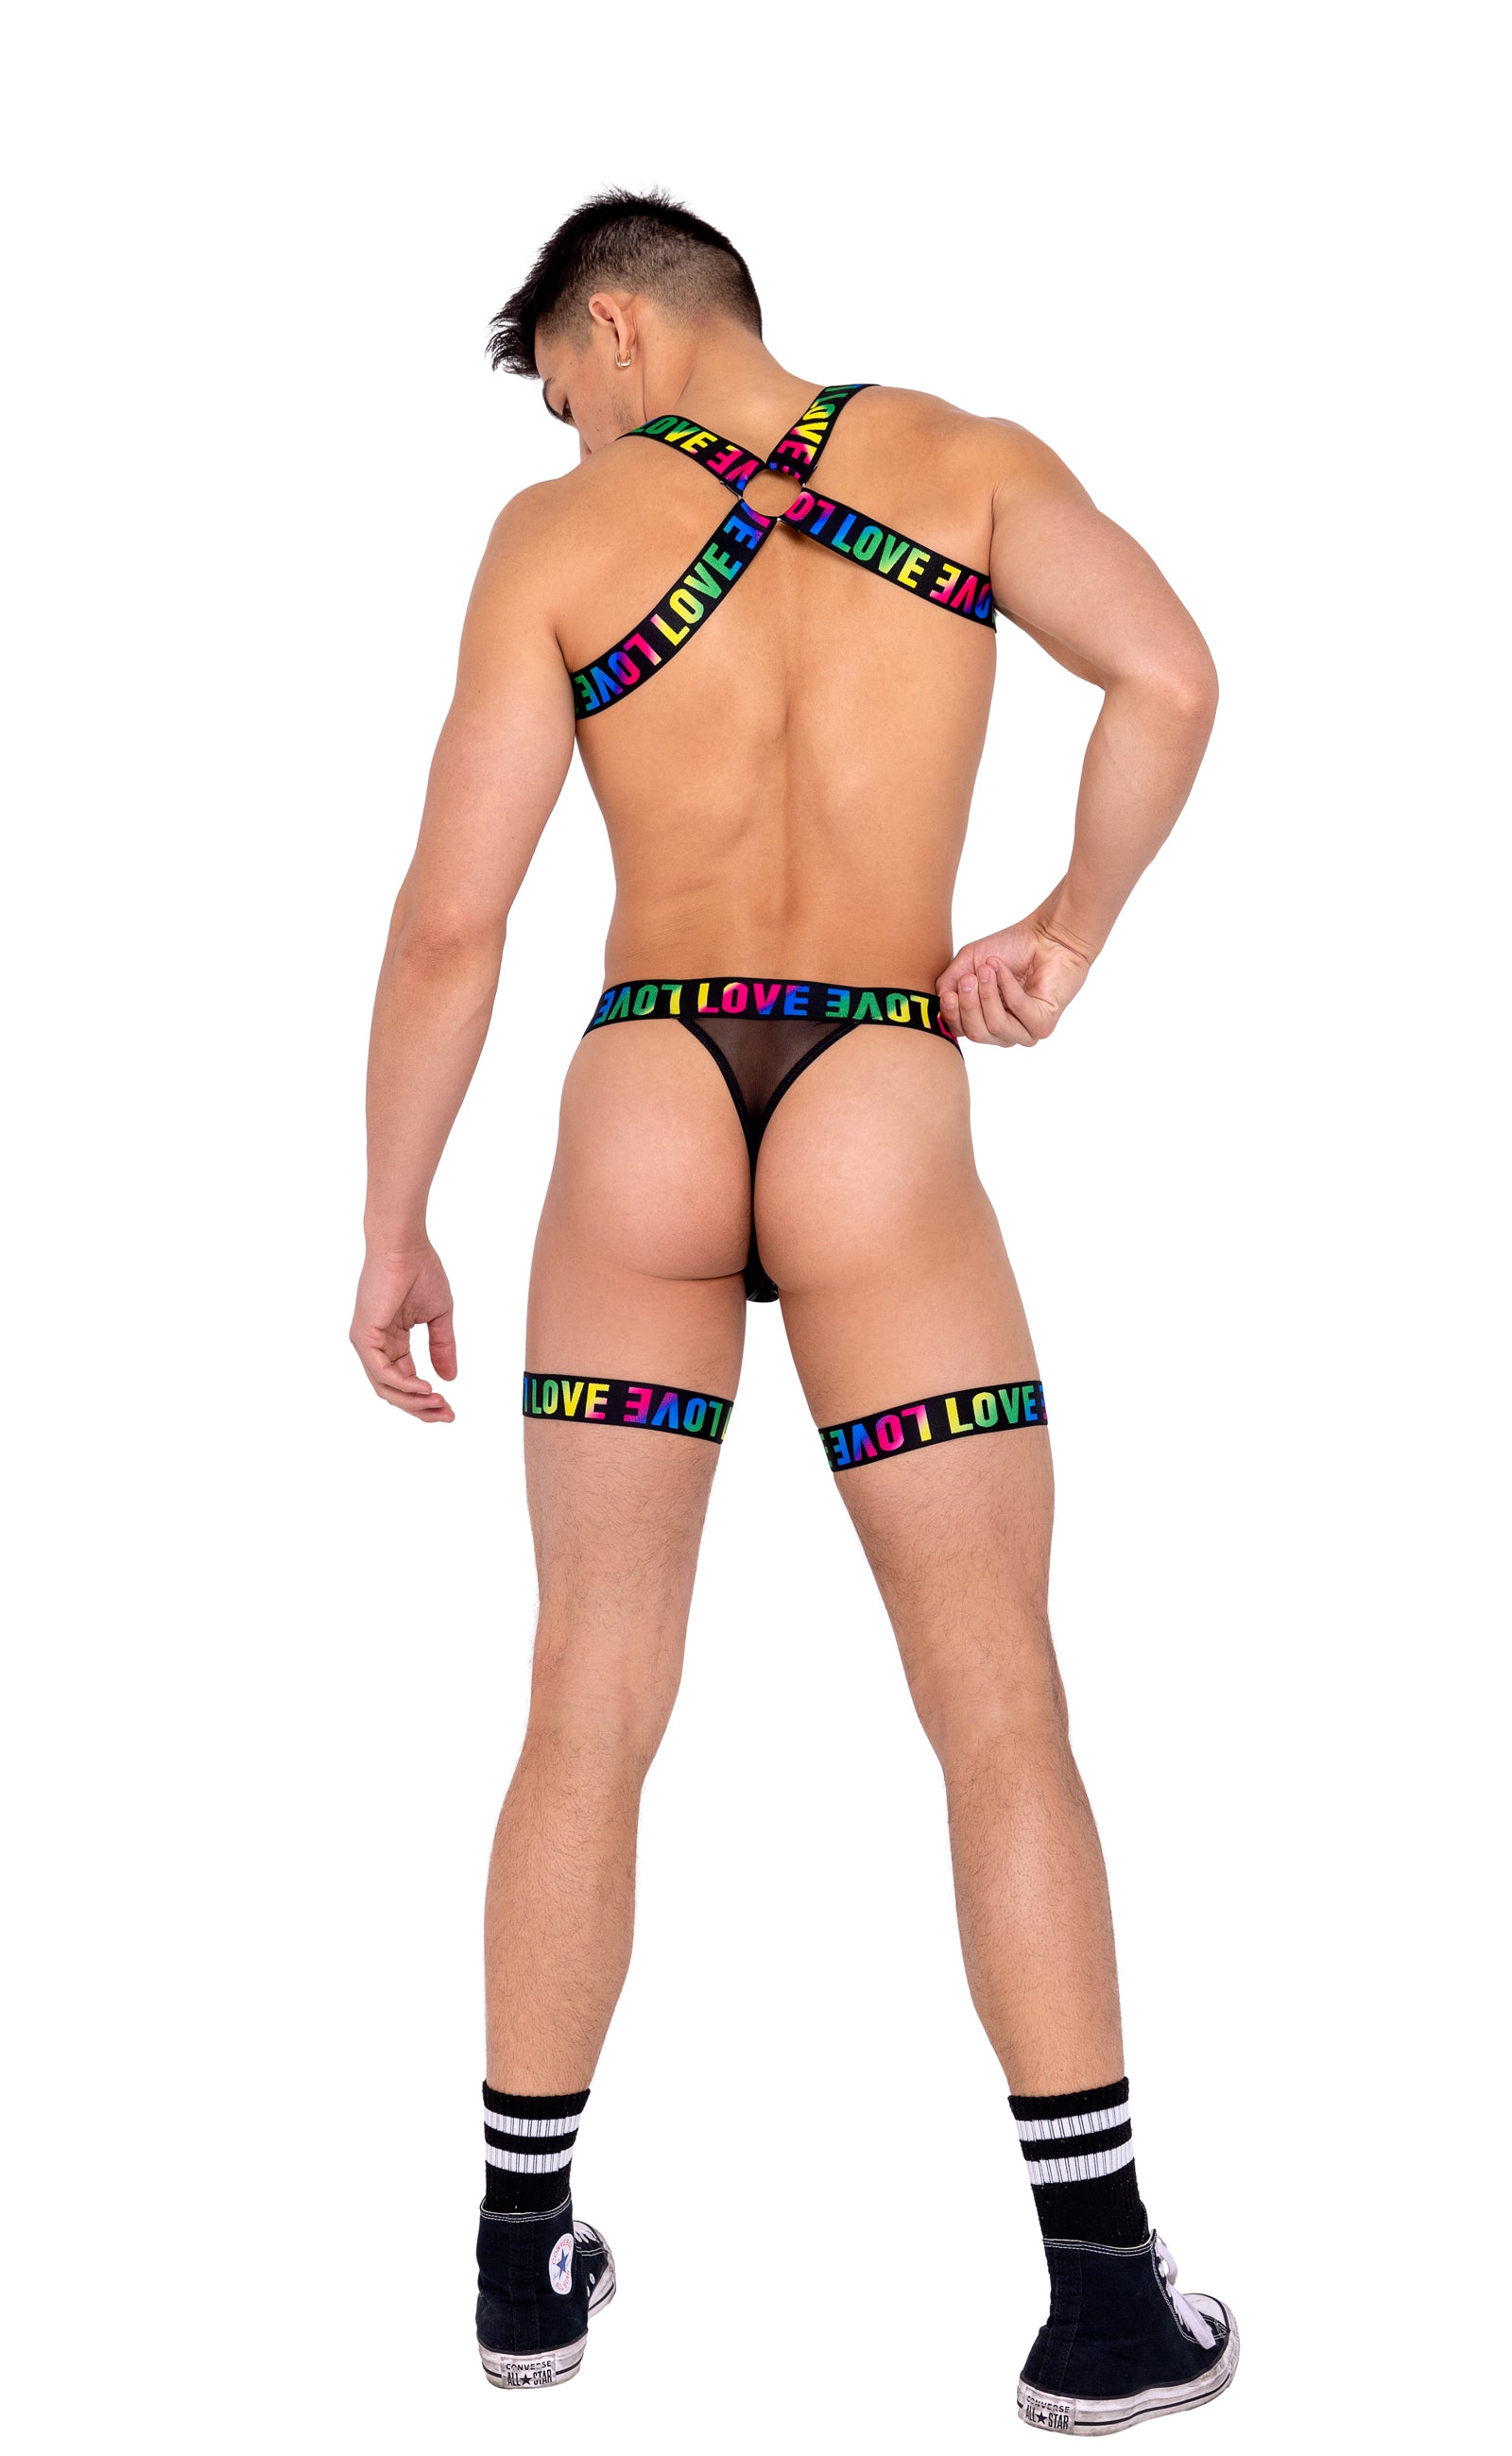 Men’s Pride Harness with Chain & Ring Detail